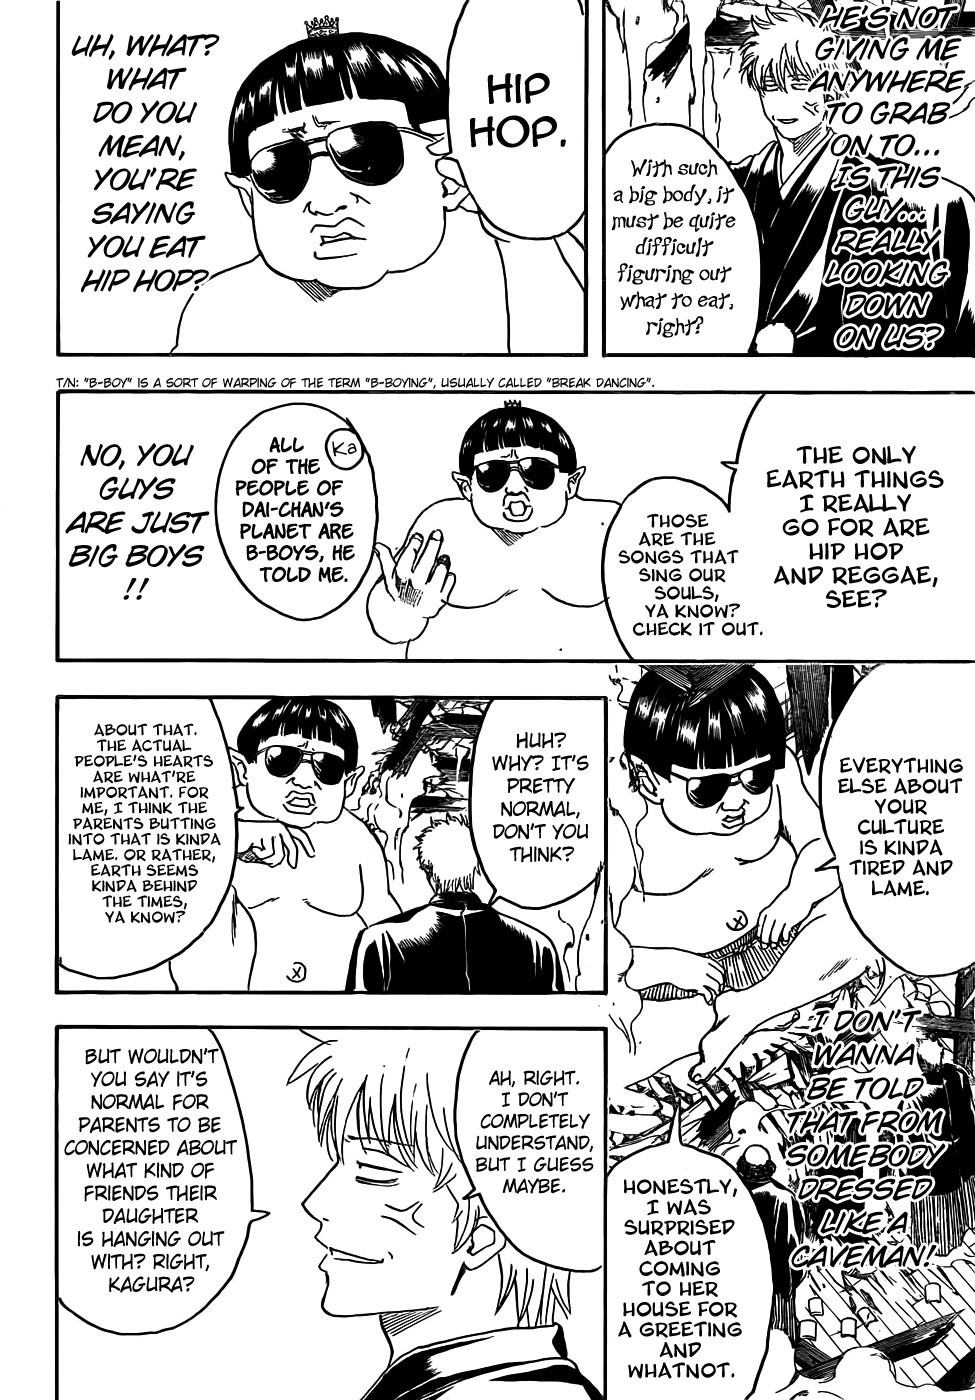 Gintama chapter 421 page 3